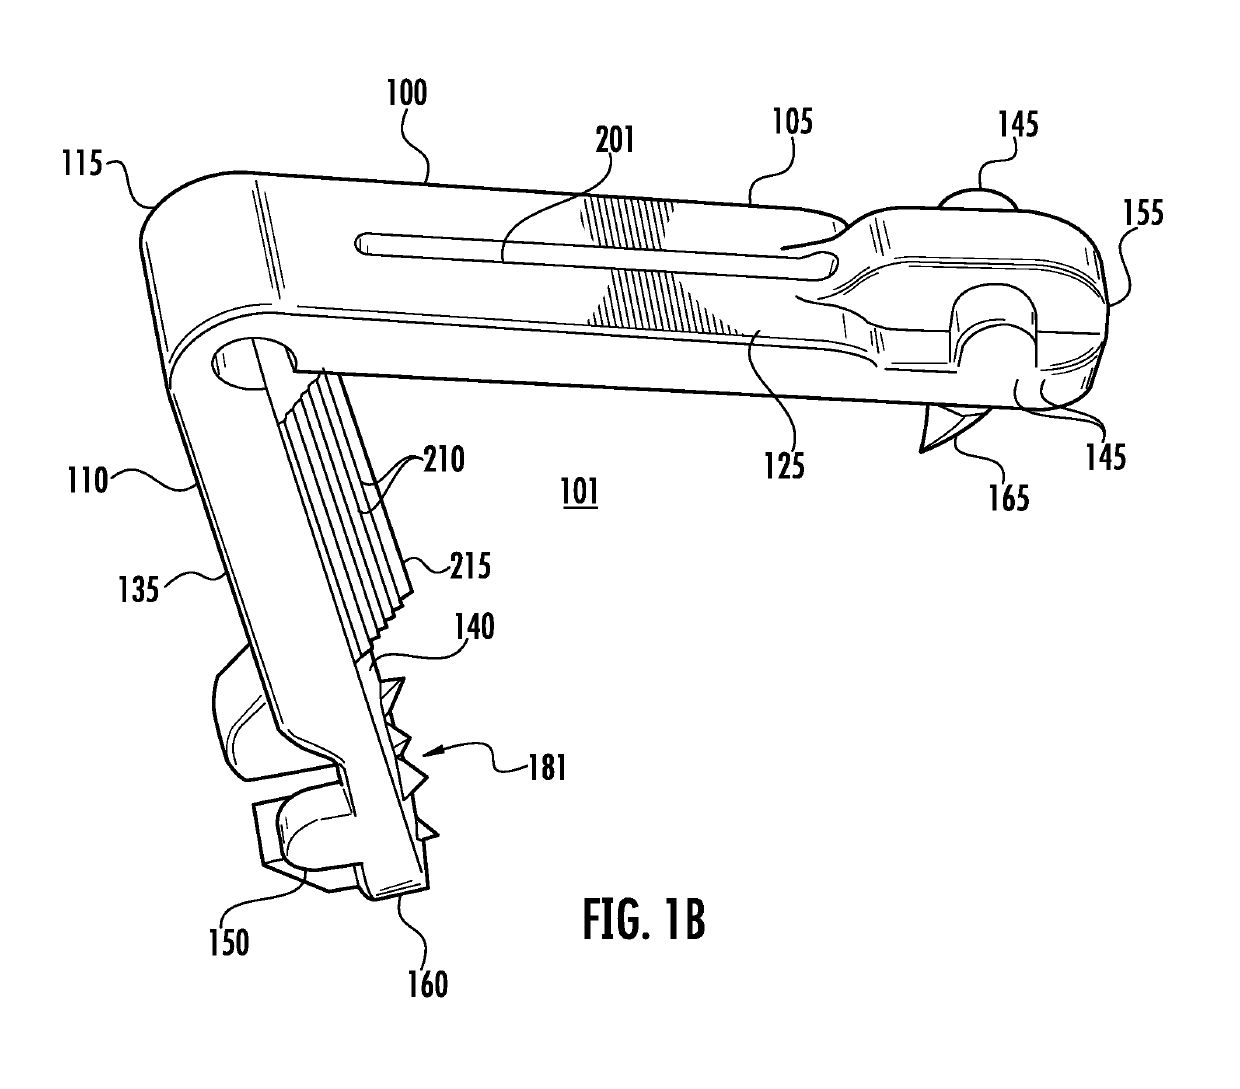 SURGICAL CLIPS WITH PENETRATING LOCKing mechanism and NON-SLIP CLAMPING SURFACES